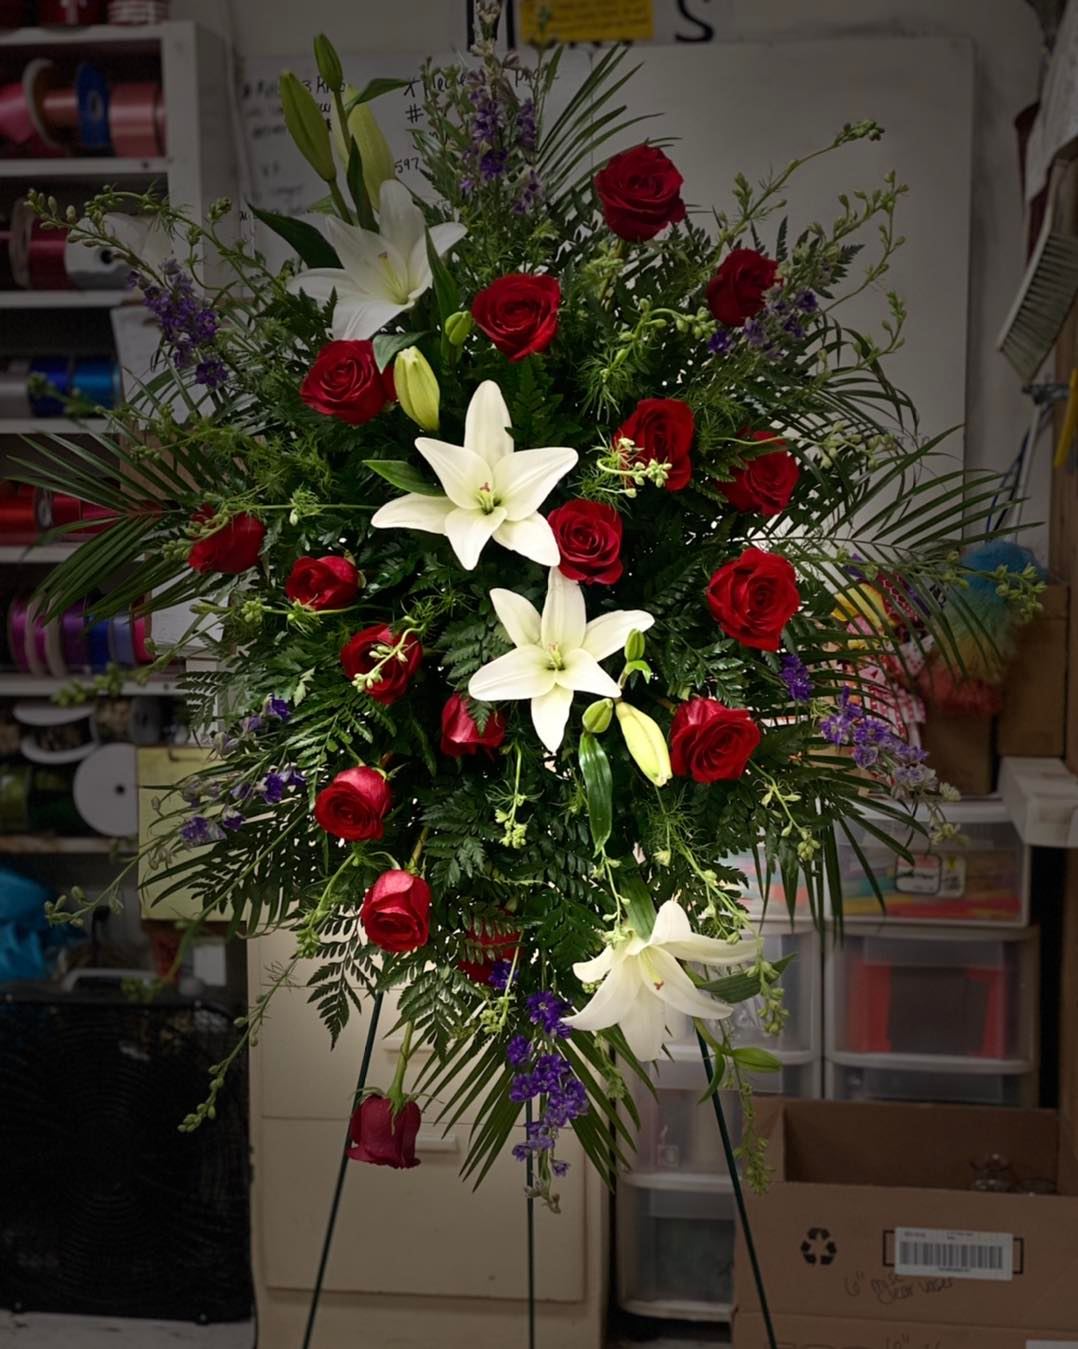 Mont's Flower Shop 323 Cleveland St, Ripley Tennessee 38063